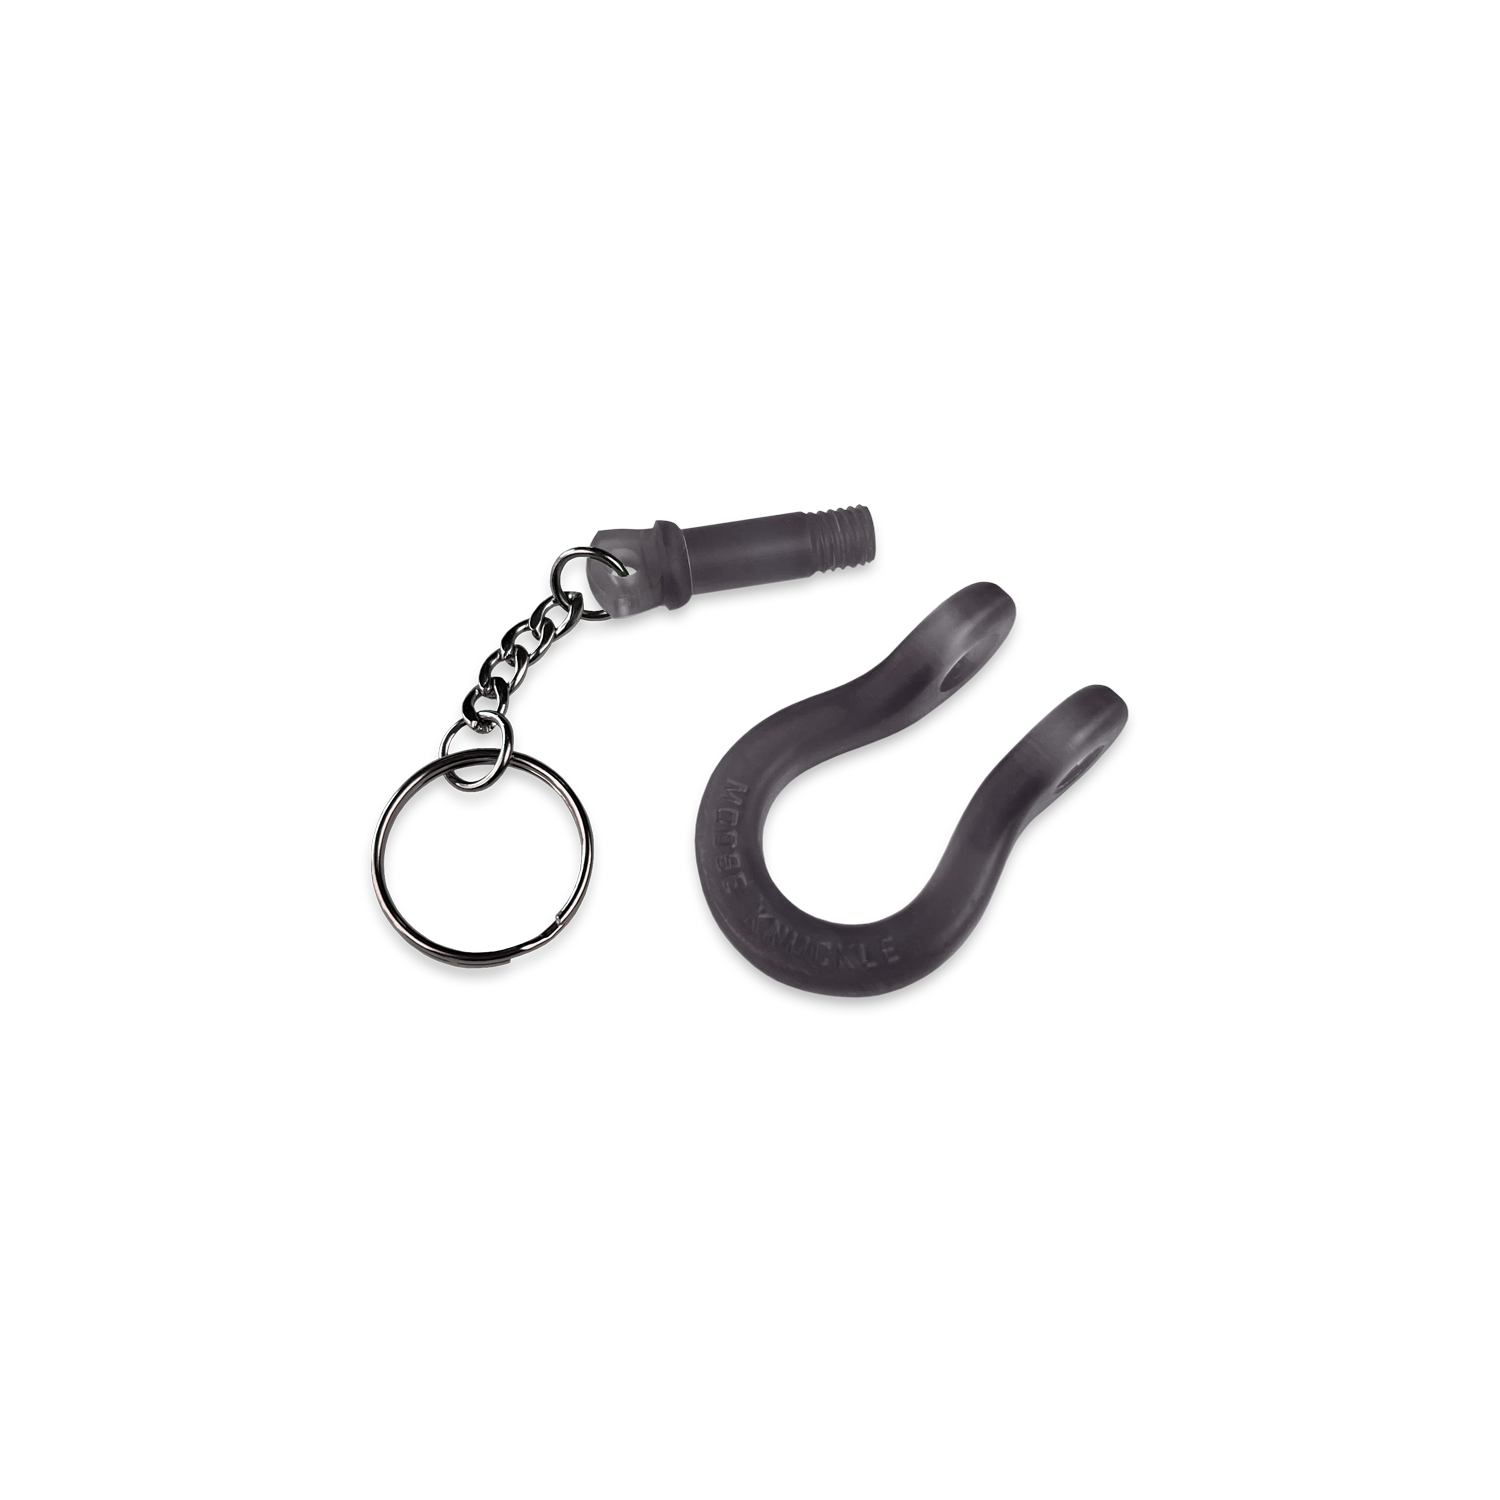 B'oh Shackle Screw Pin Key Chain in Rolling Coal Pin and Body